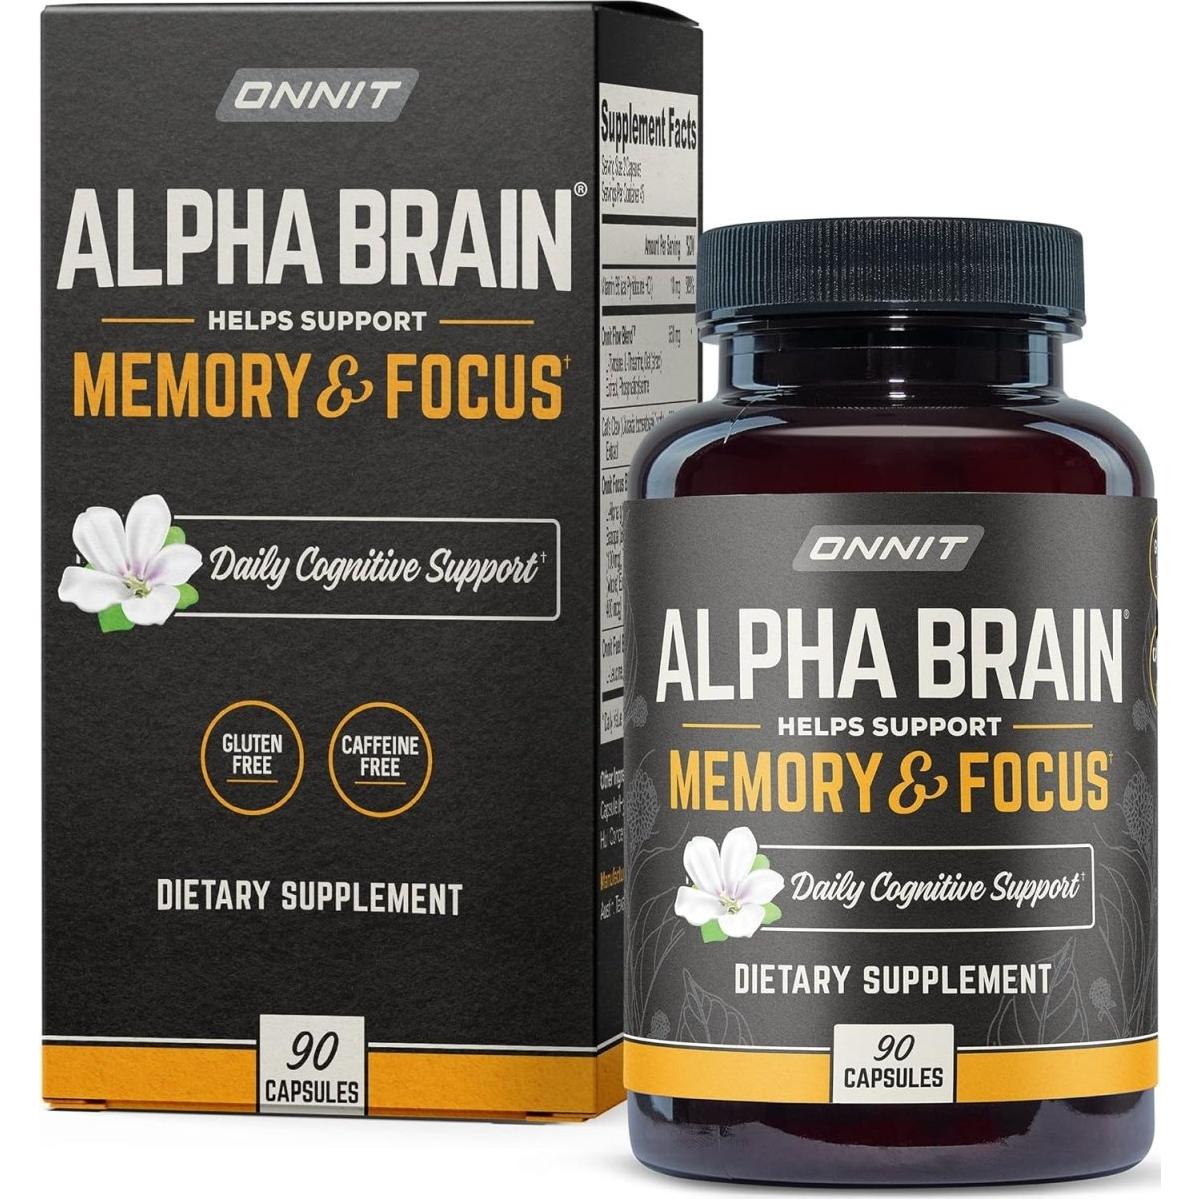 Onnit Alpha Brain Premium Nootropic Supplement, 90 Count, for Men & Women - Caffeine-Free Focus Capsules for Concentration, Brain & Memory Support - Brain Booster Cat'S Claw, Bacopa, Oat Straw - Glam Global UK